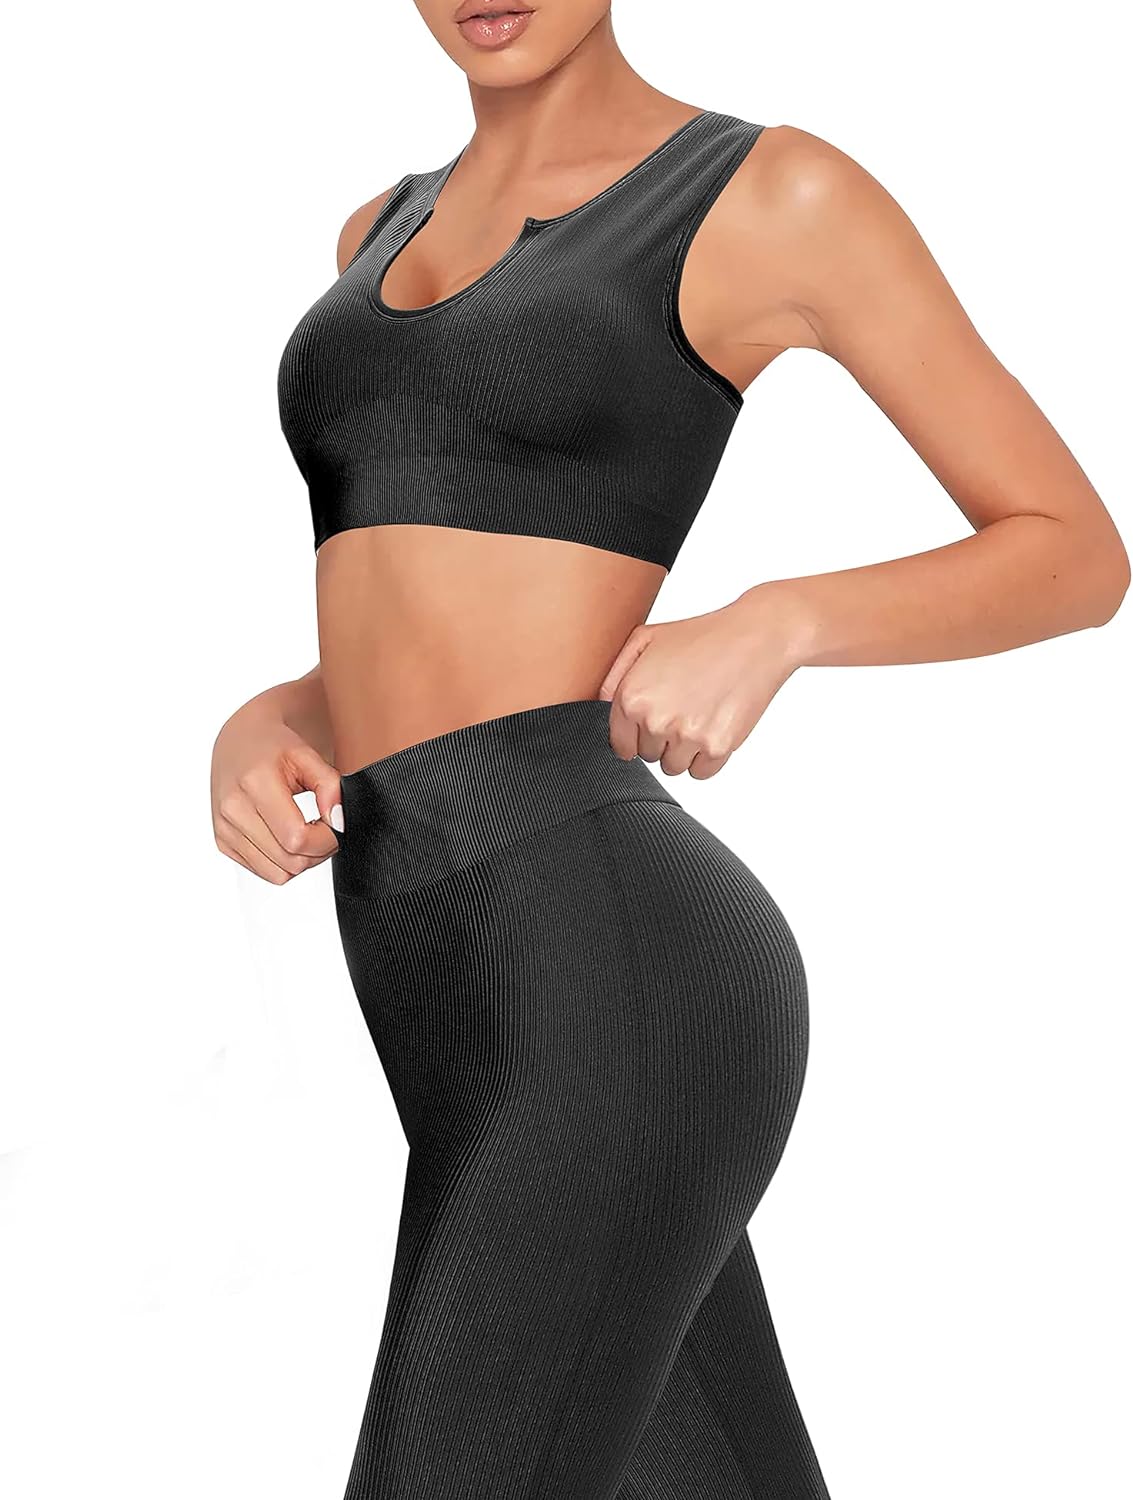 2 Piece Workout Sets for Women Seamless Yoga Outfits Ribbed Sports Bra Gym Shorts Leggings Set